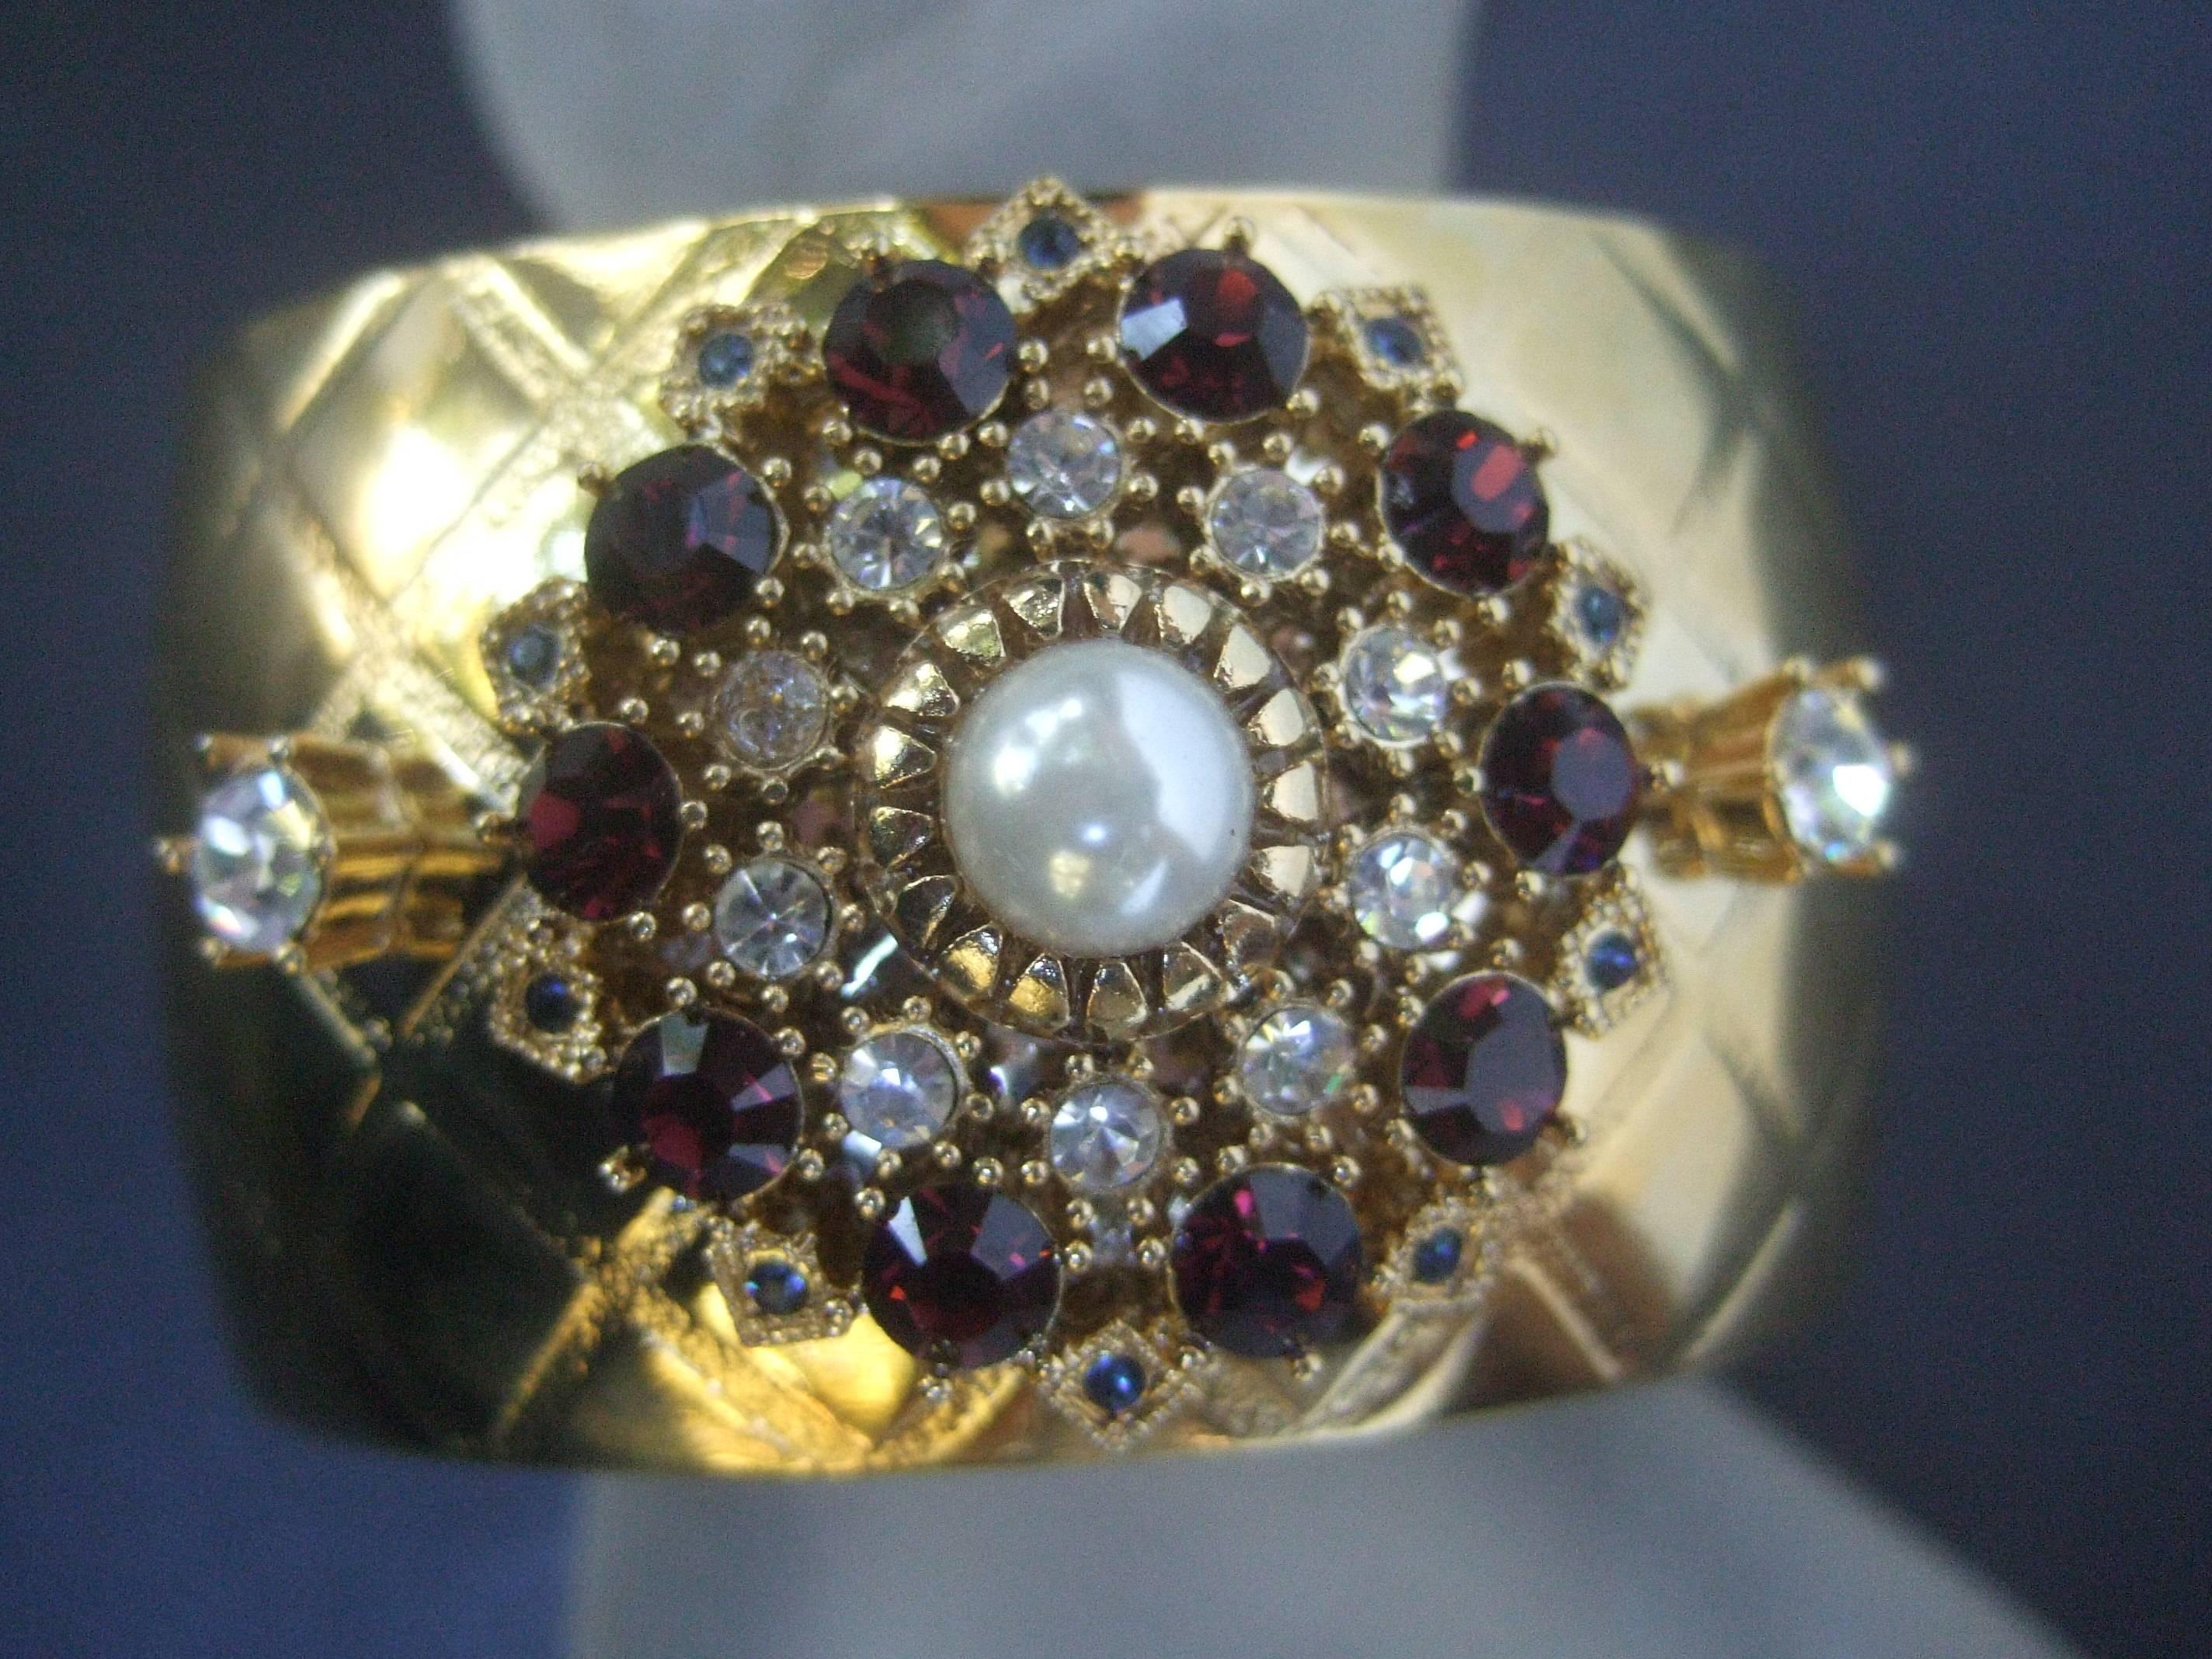 Glittering crystal wide gilt metal cuff designed by Graziano 
The opulent gilt metal cuff bracelet is embellished
with a wreath of garnet color crystals accented
with diamante crystals and tiny smokey gray 
crystals

The gilt metal cuff is